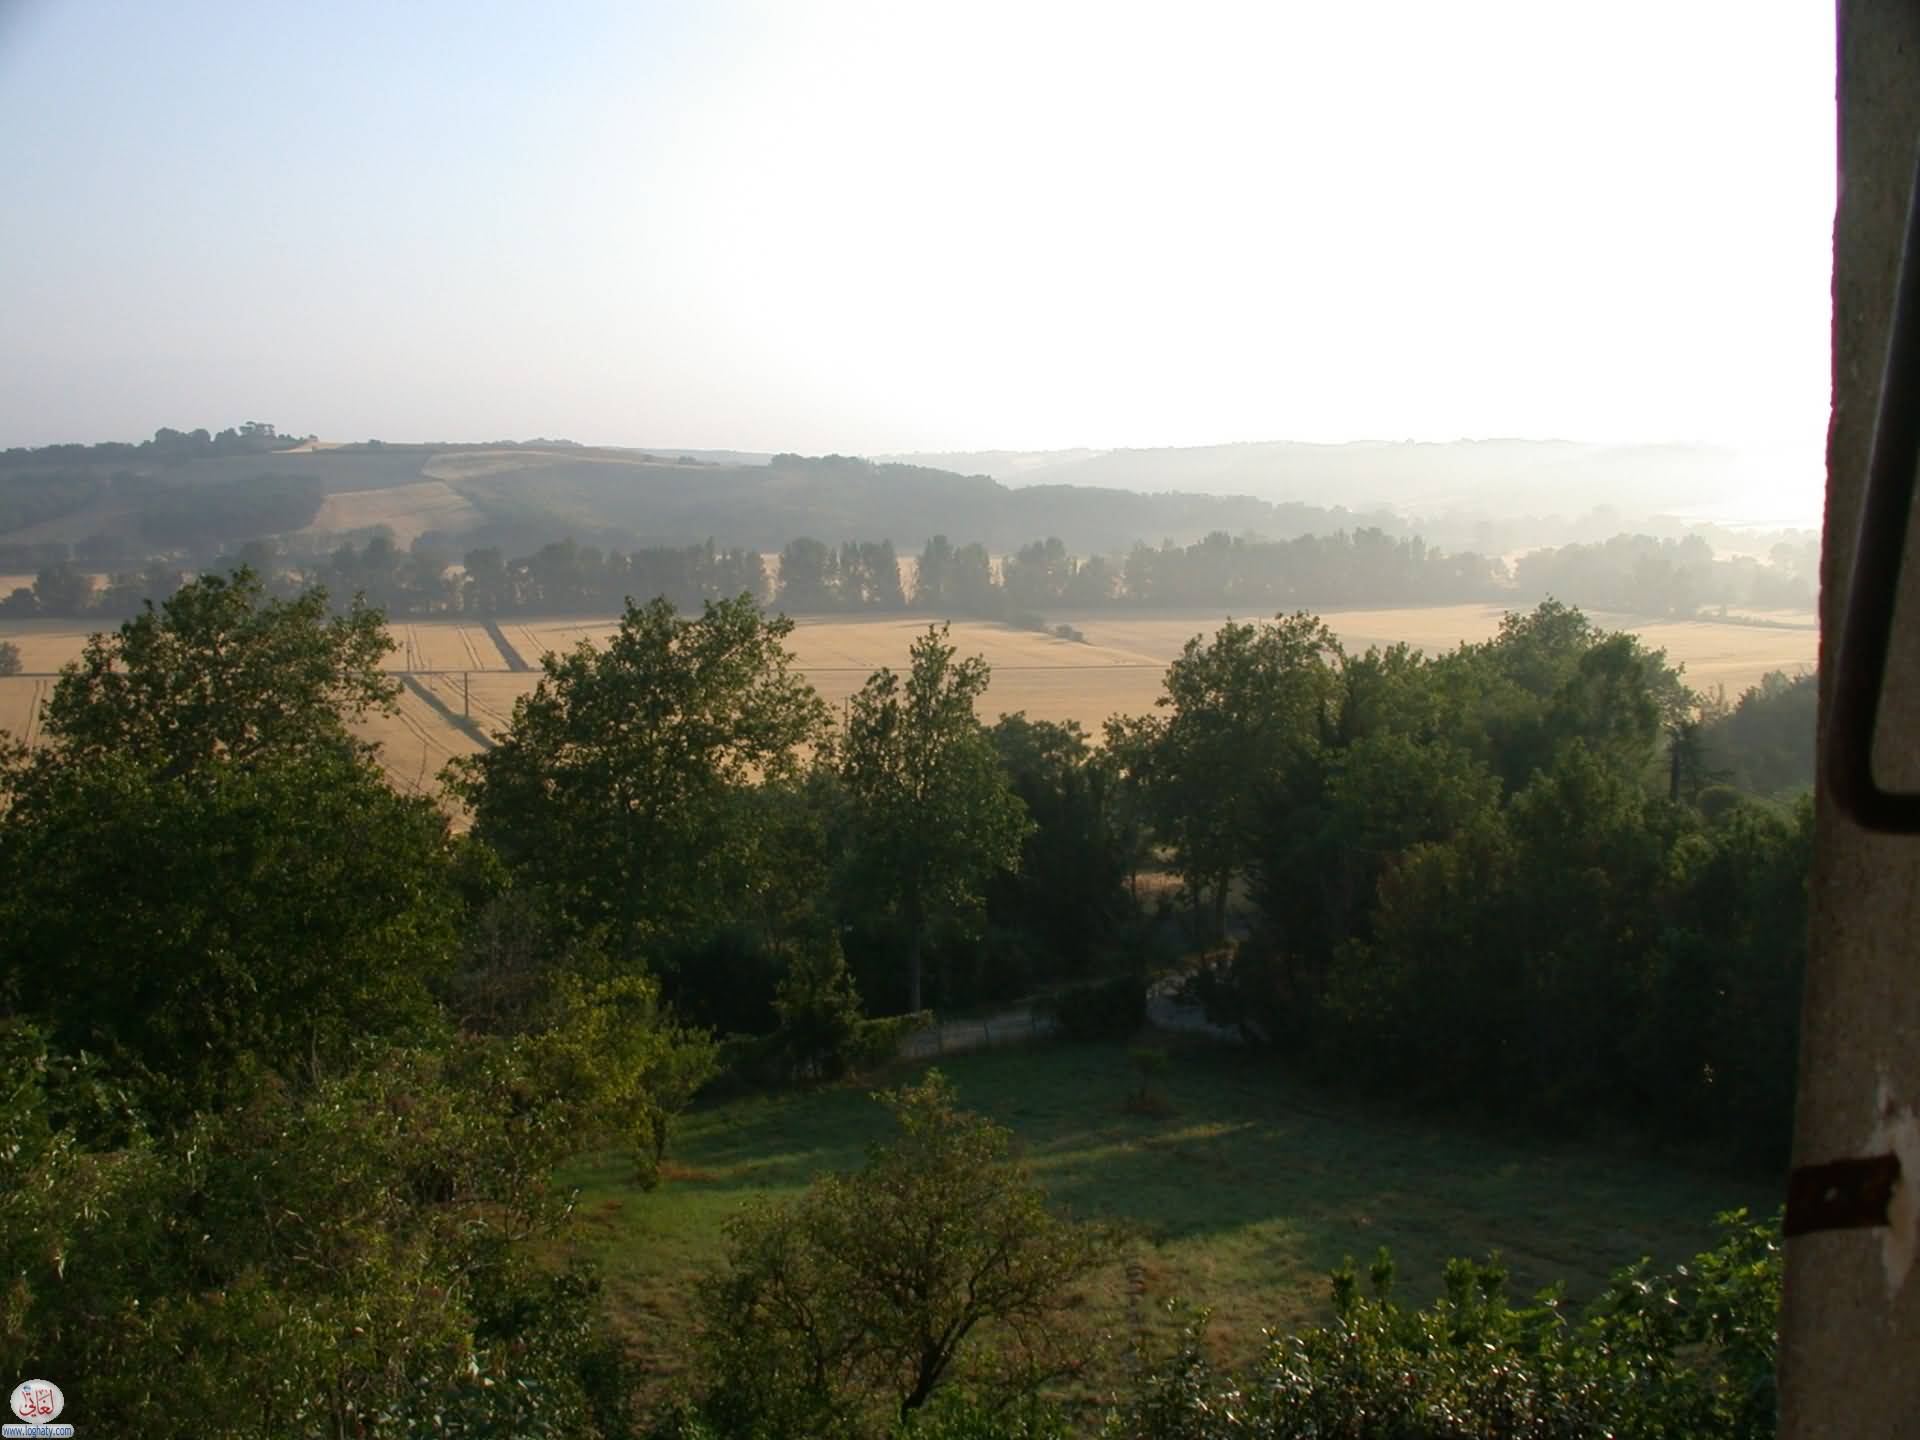 Sunrise in the country, France